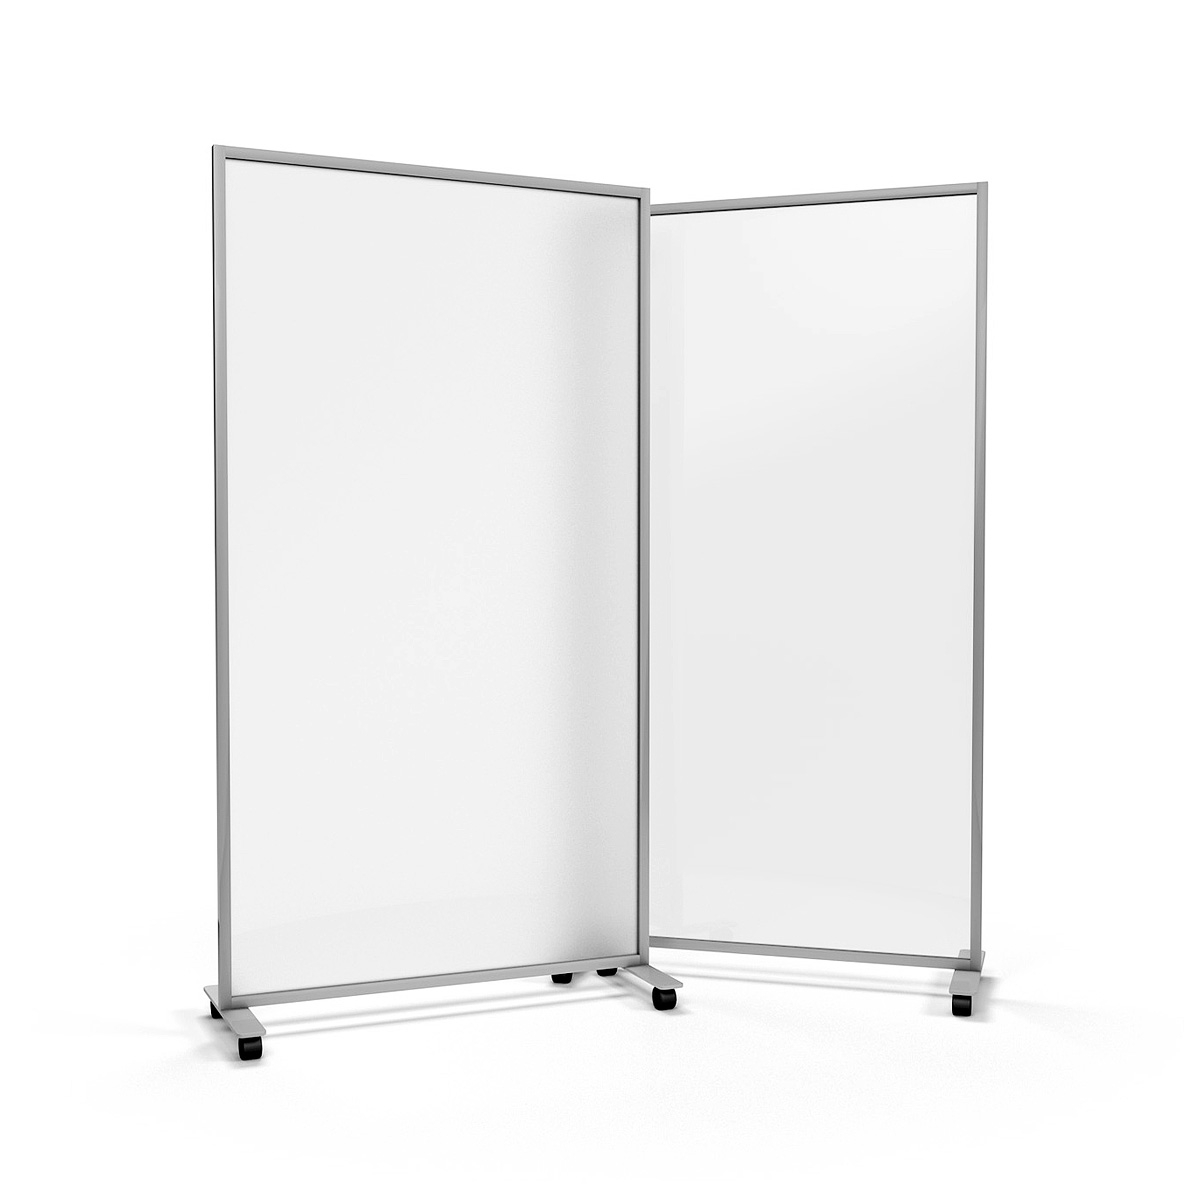 ACHOO® Frosted Perspex® Glass Office Divider on Wheels